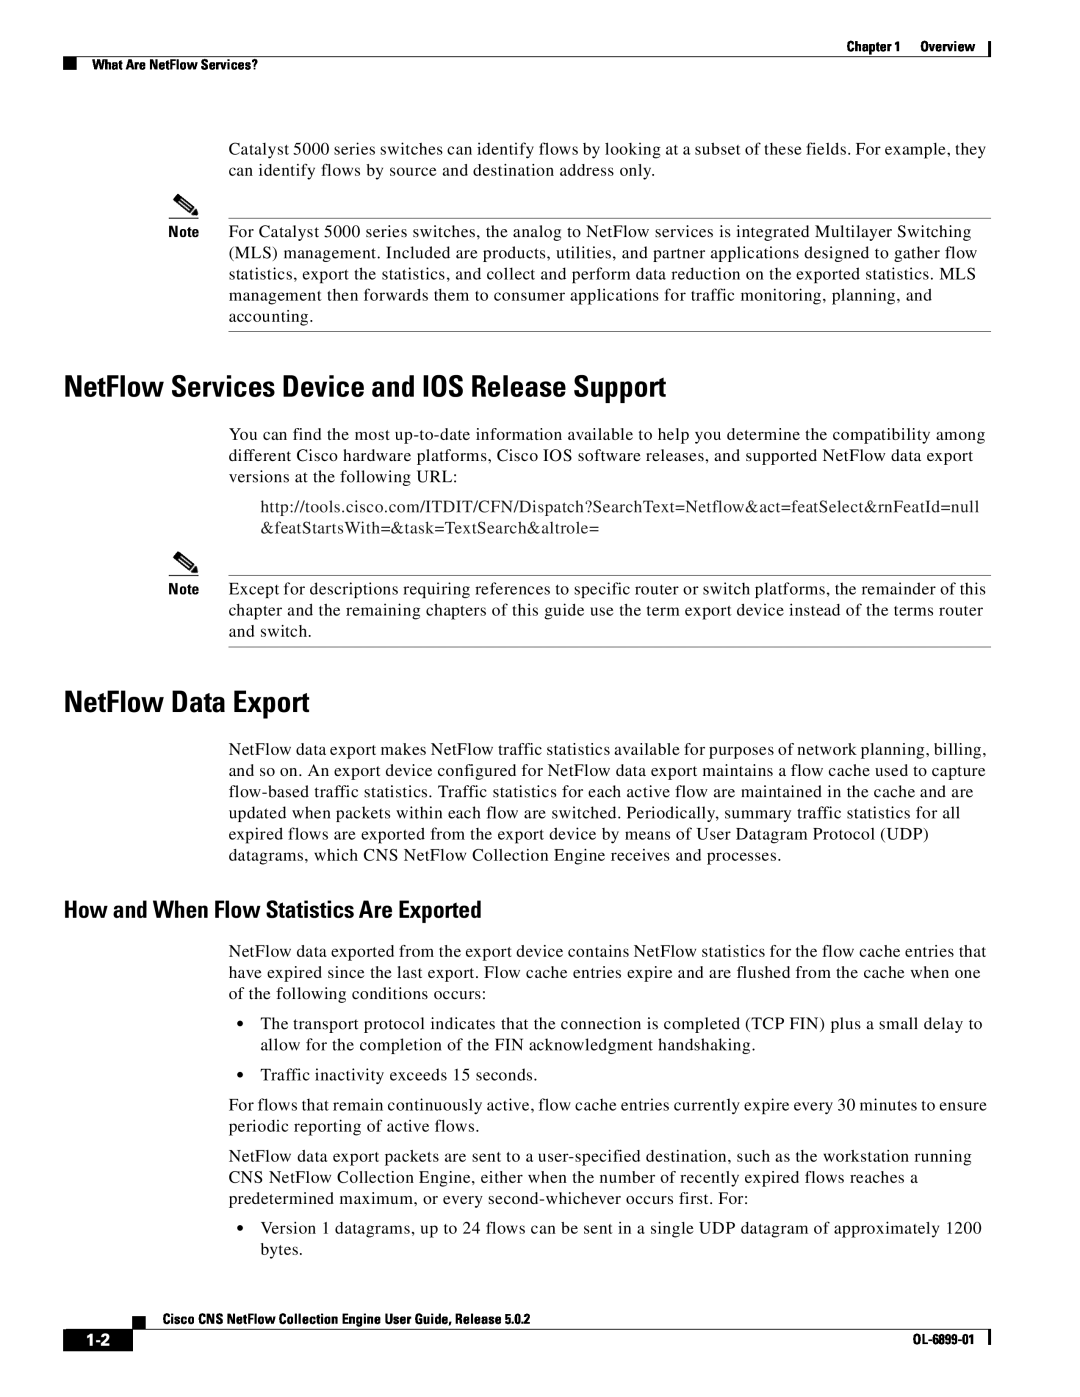 Cisco Systems OL-6900-01 manual NetFlow Services Device and IOS Release Support, NetFlow Data Export 